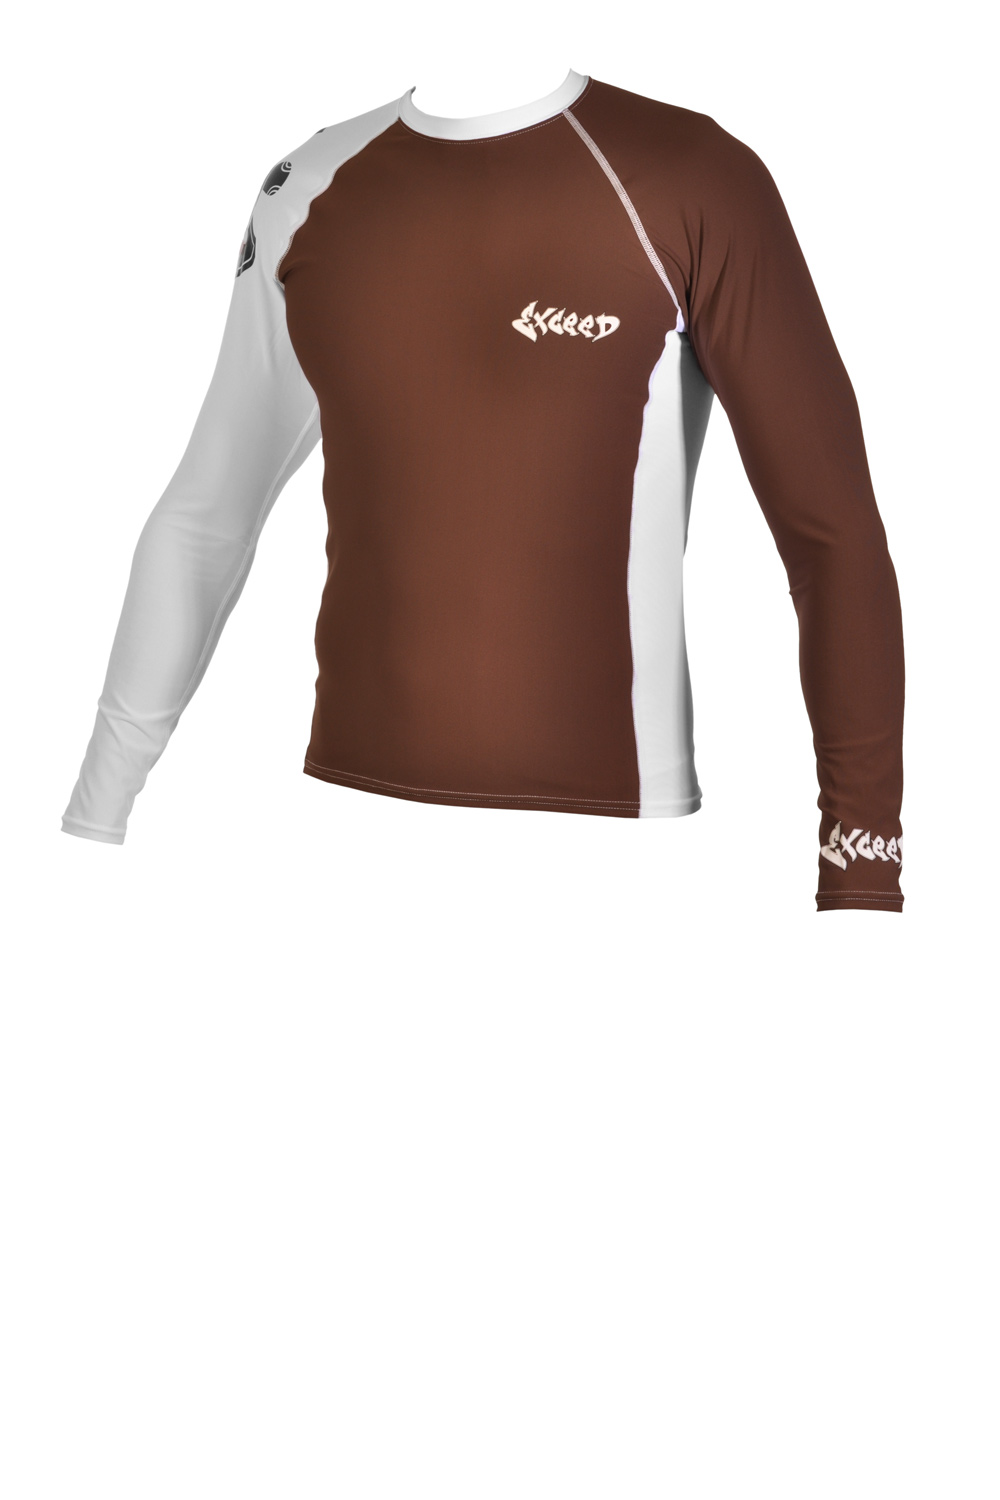 Exceed Expedition Mens Long Sleeve Rash Guard